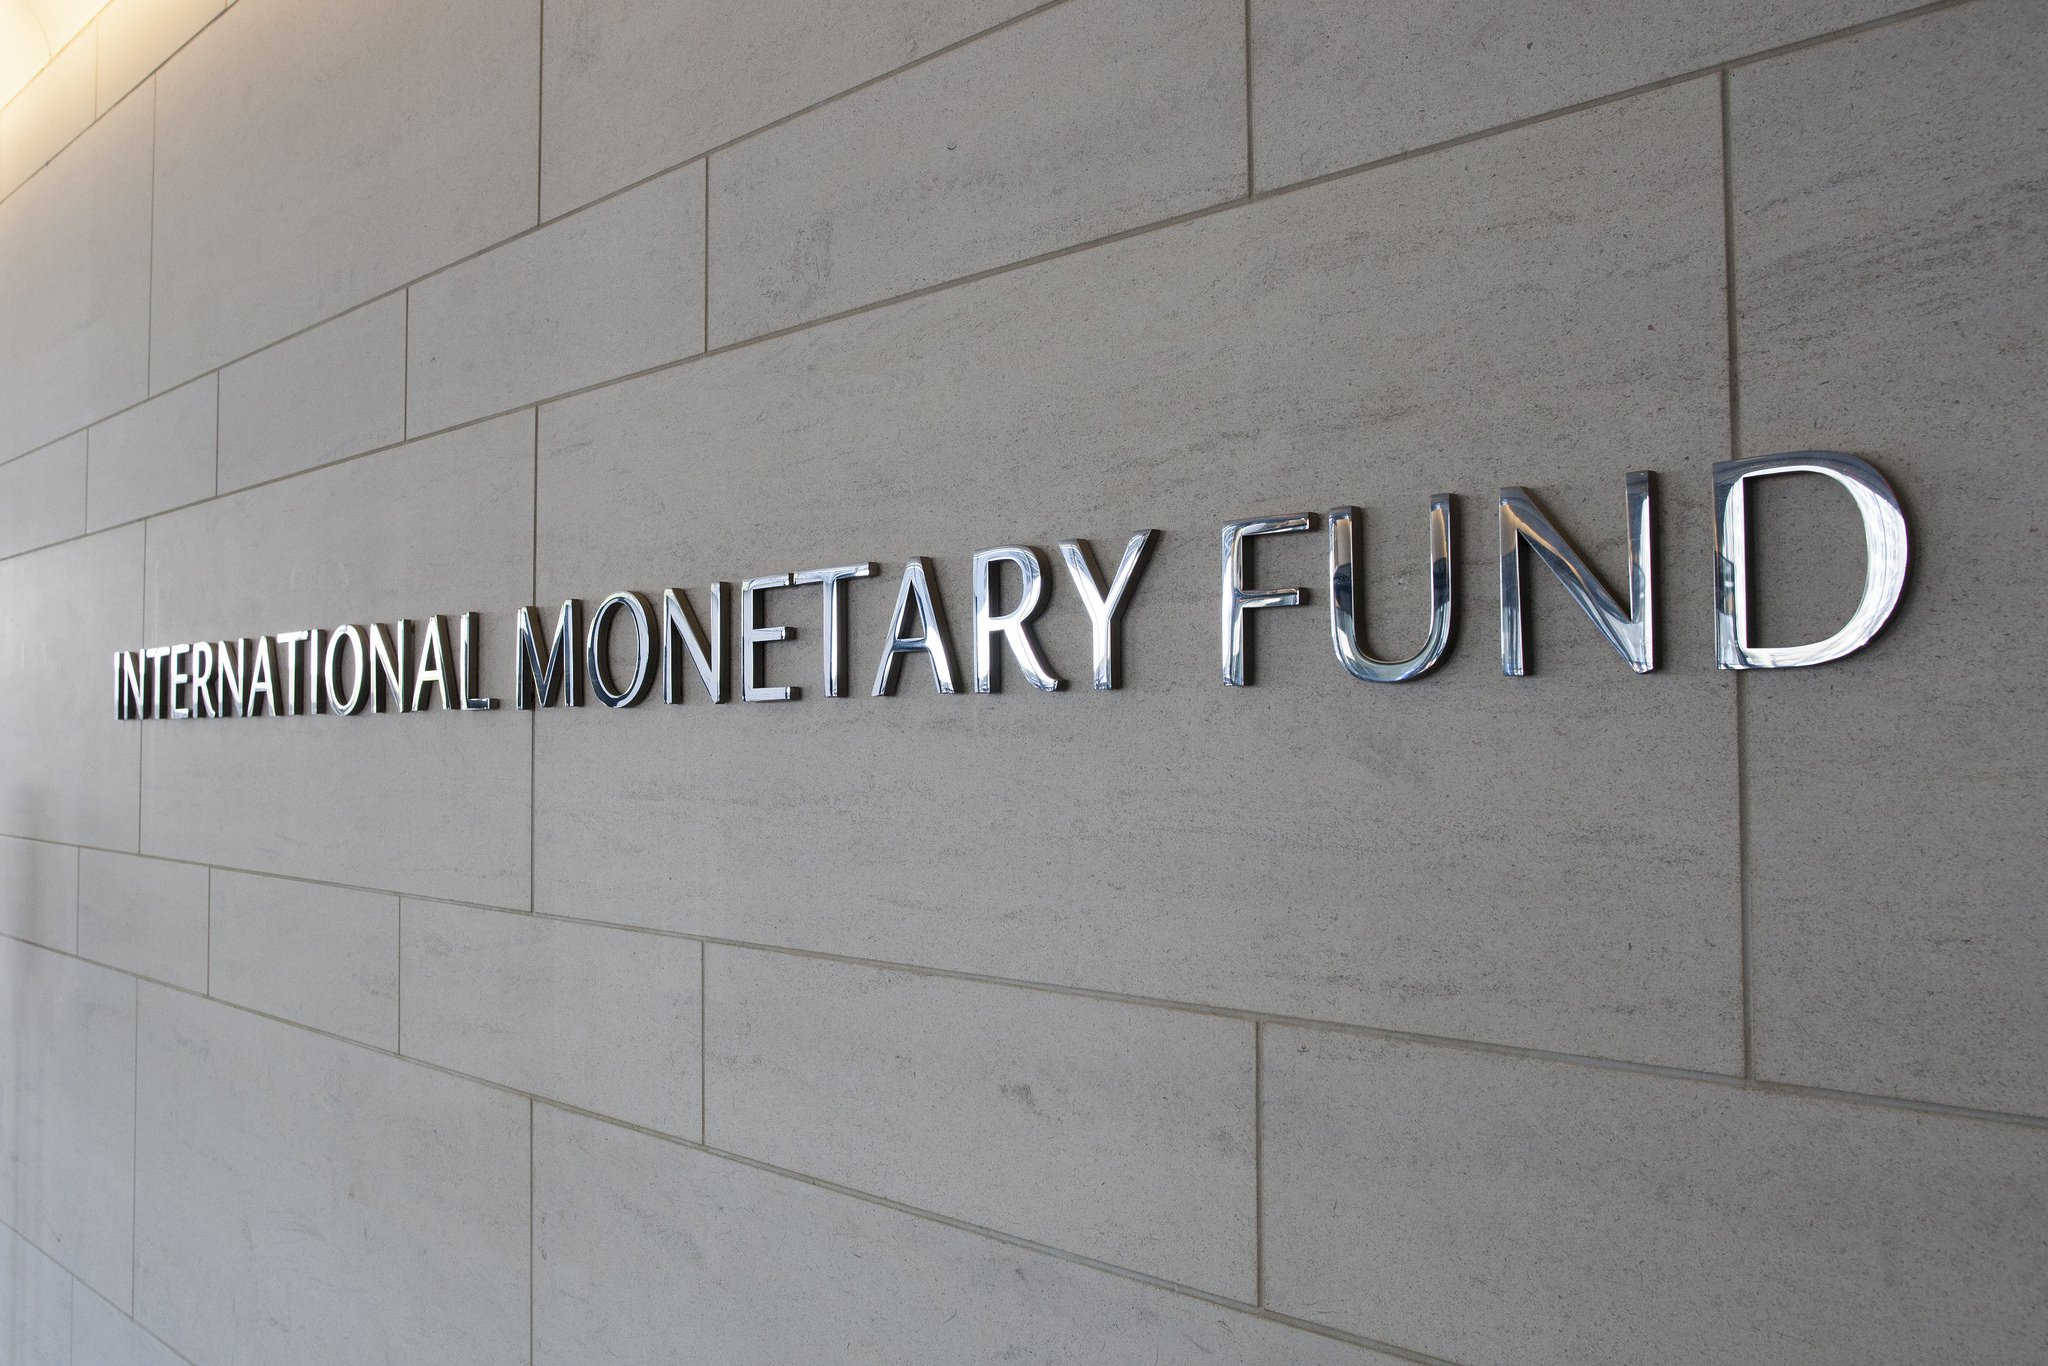  The International Monetary Fund in Washington, D.C. Photo: World Bank Photo Collection (CC BY-NC-ND 2.0)